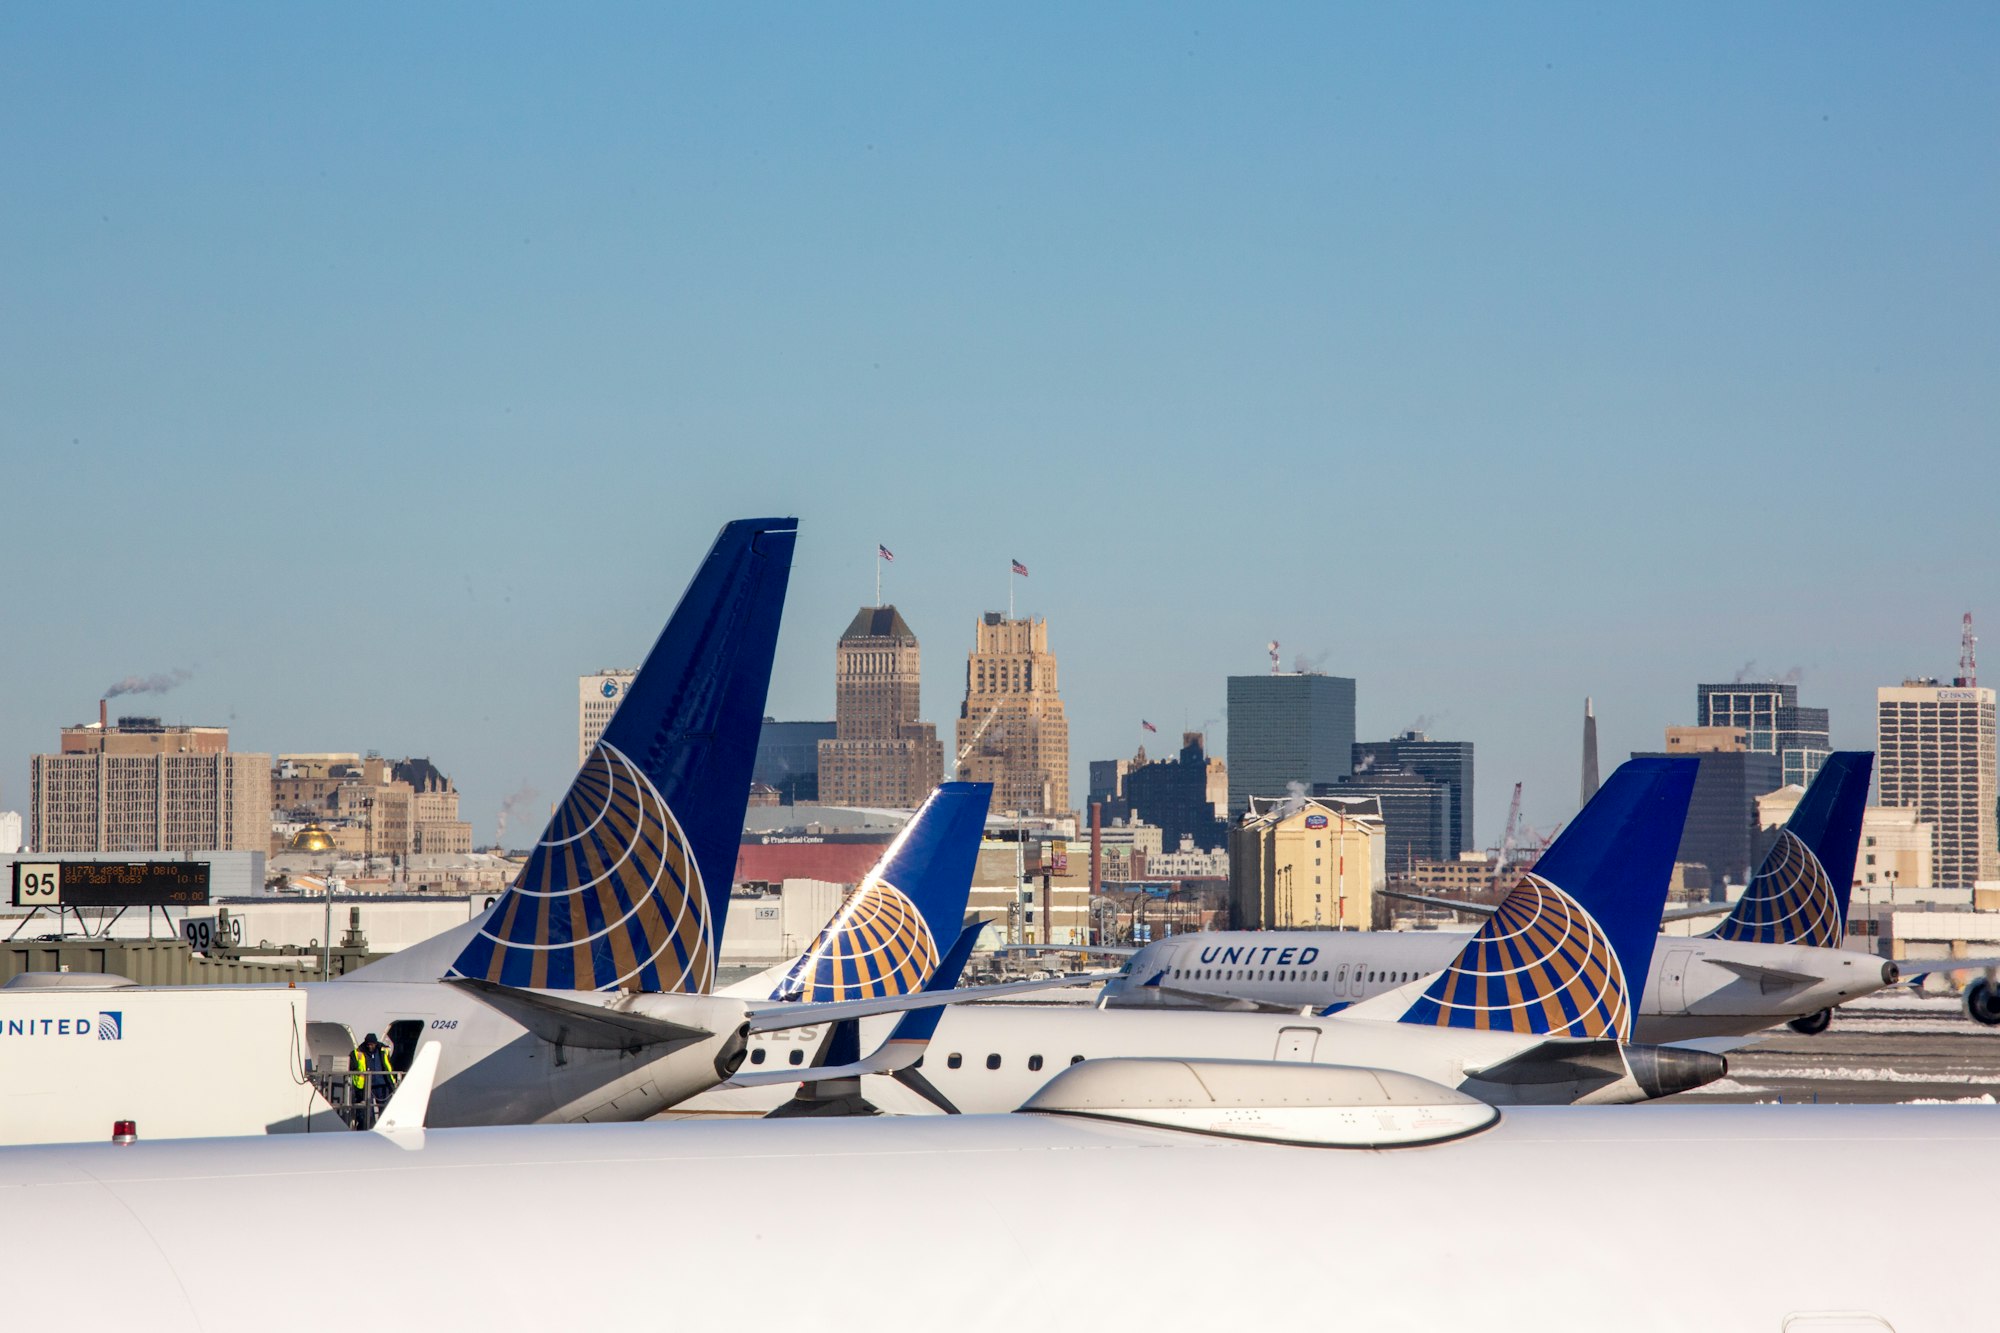 United Airlines Expands Horizons: New Services to Malaga, Stockholm, and Dubai